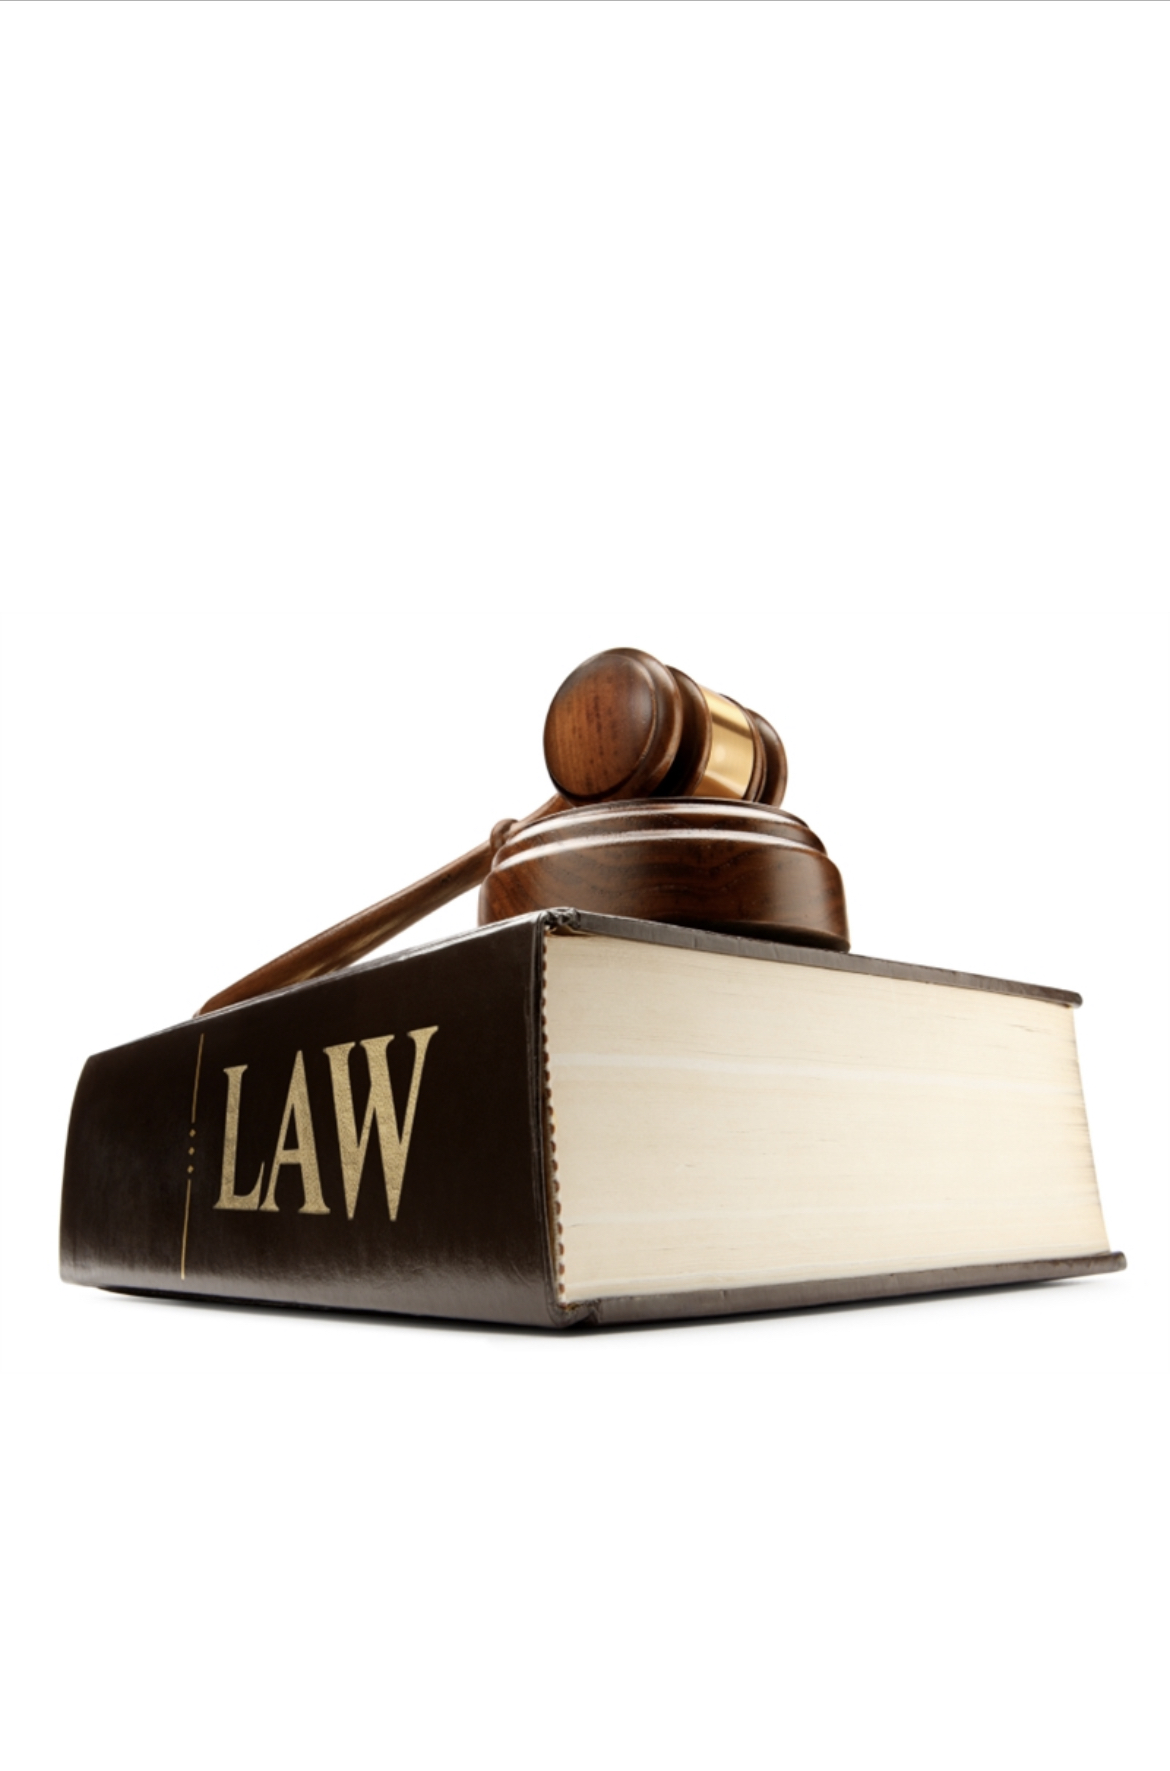 Image of law book and gavel